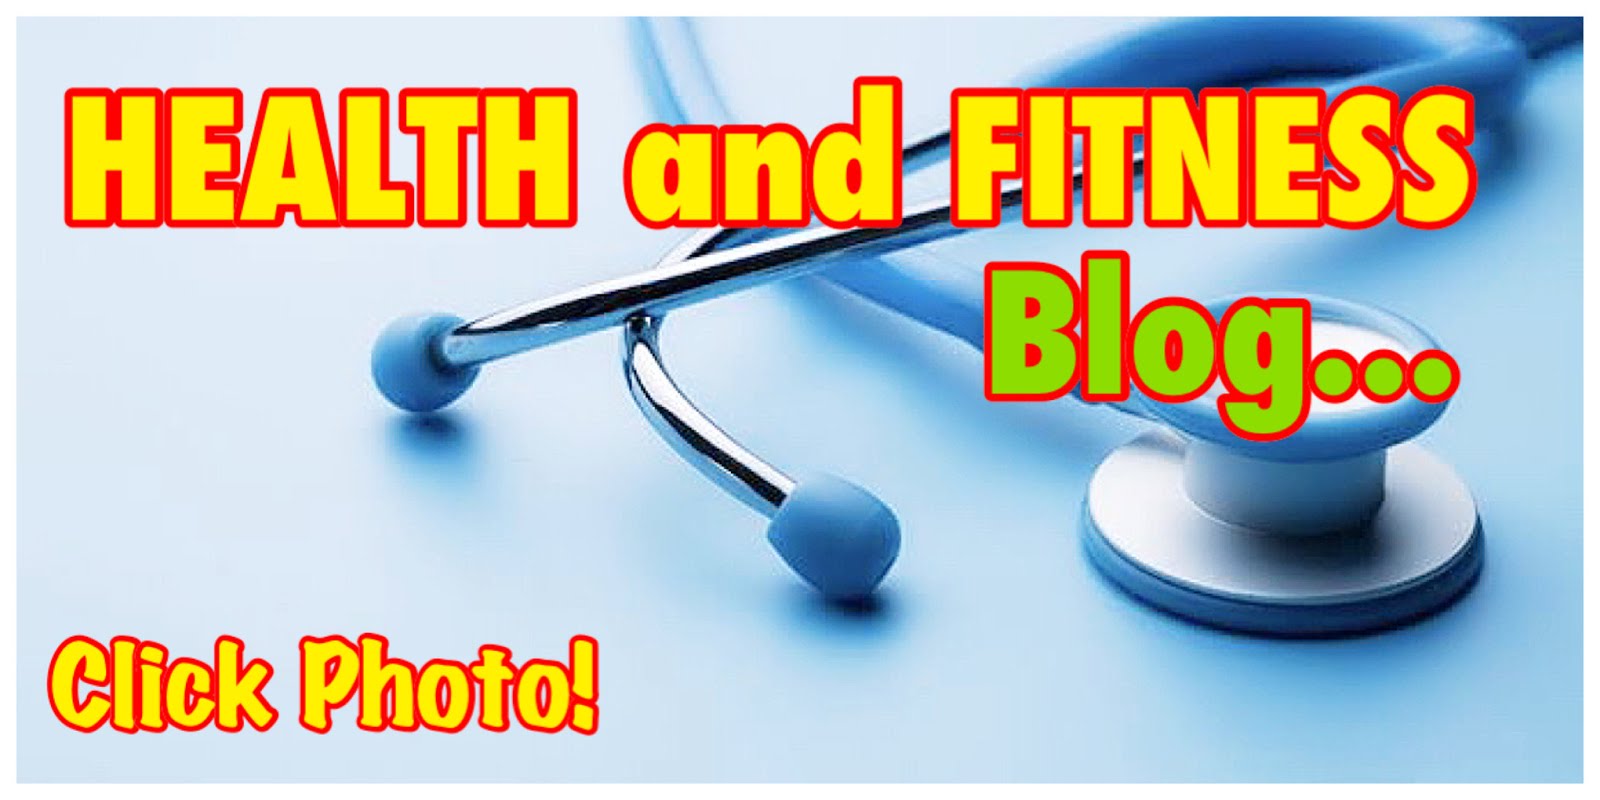 Our Health and Fitness Blog